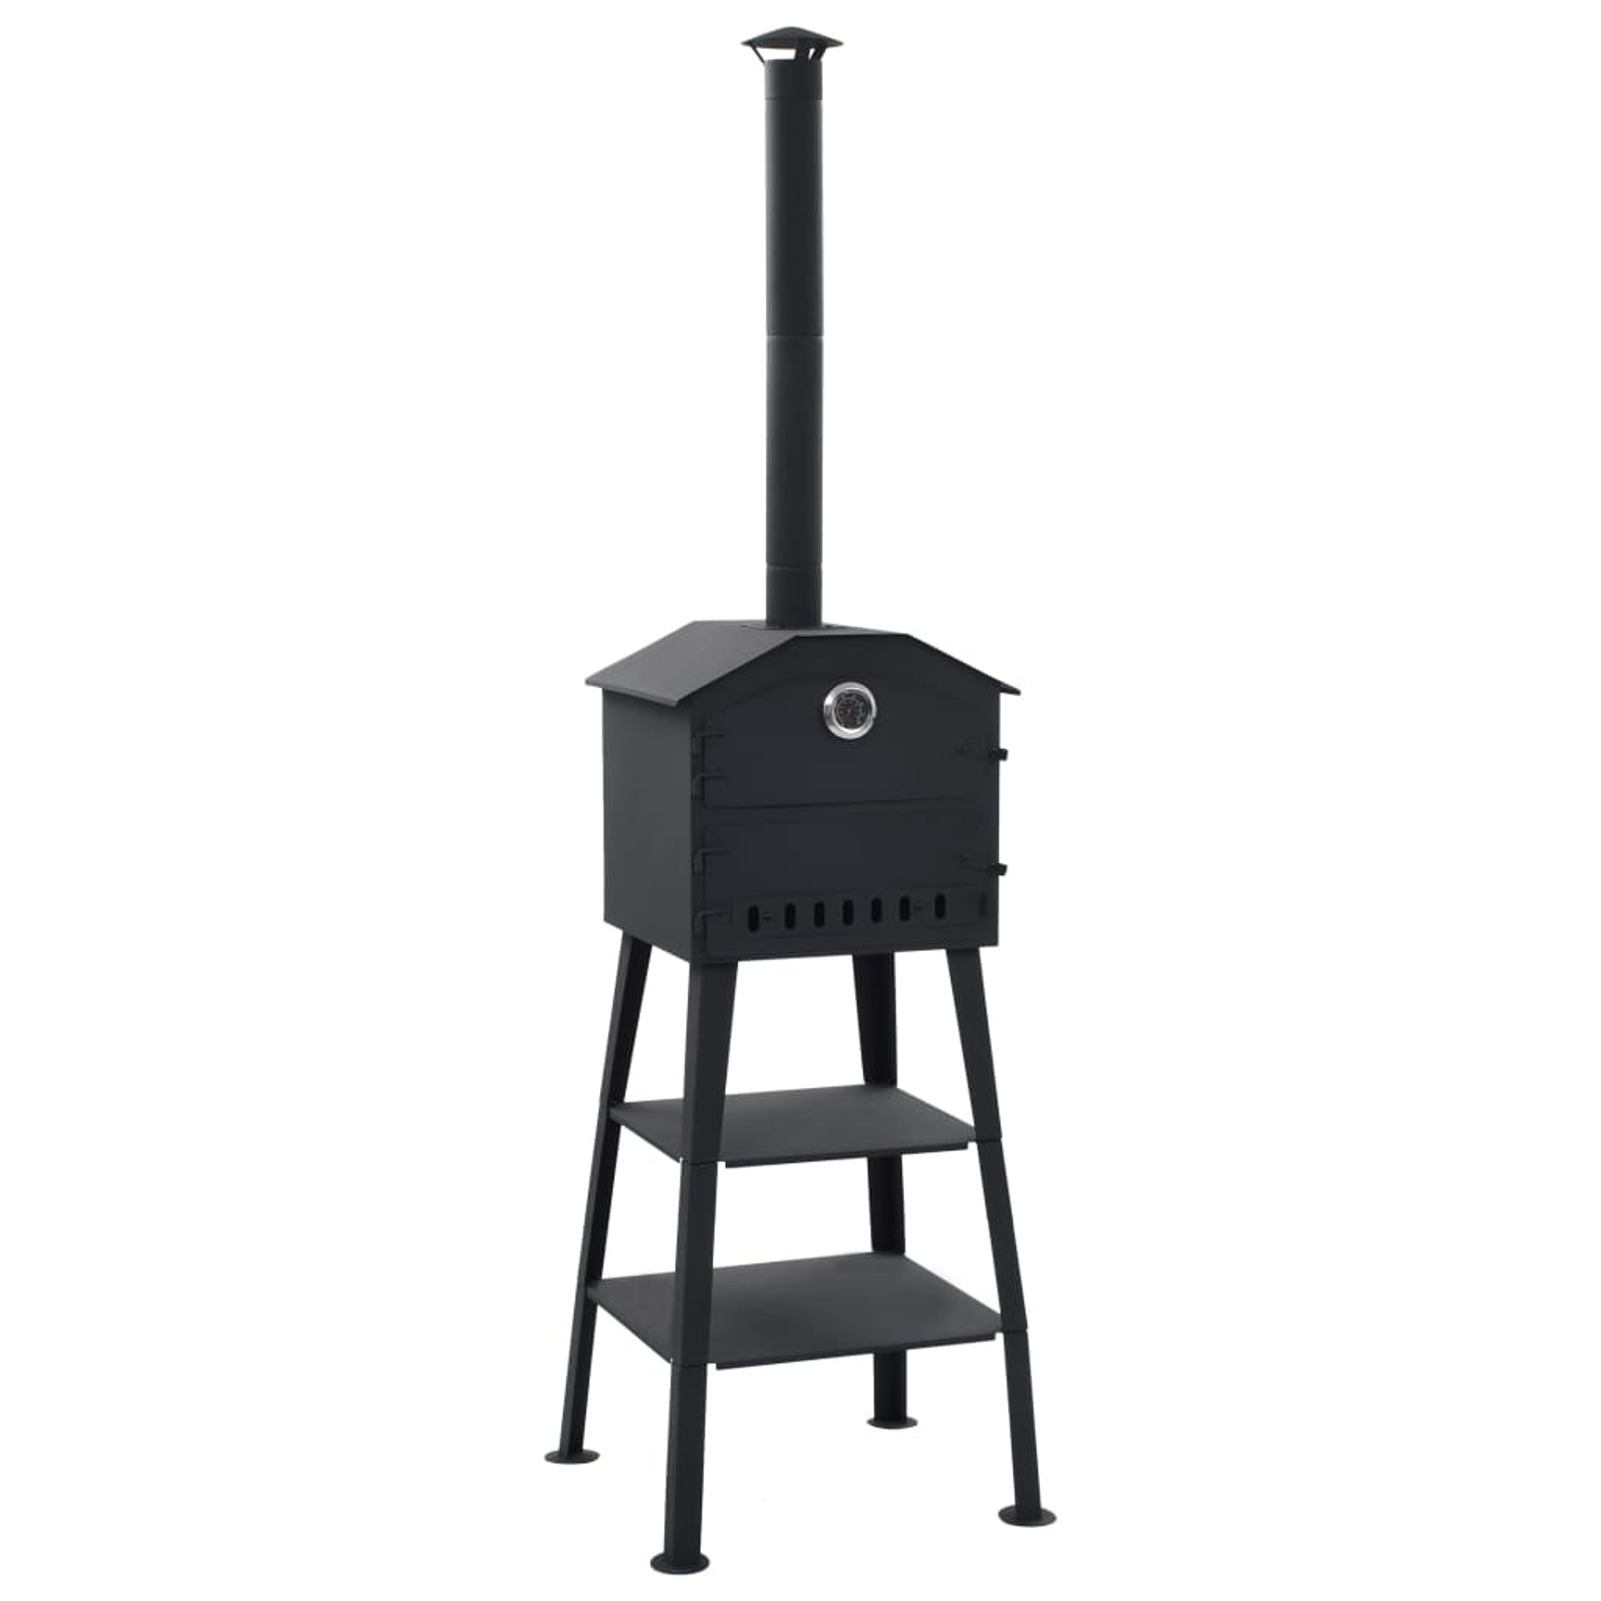 Dcenta Outdoor Pizza Oven Charcoal-Fired with 2 Fireclay Stones for Garden Chimney BBQ Smoker Bread - image 1 of 7